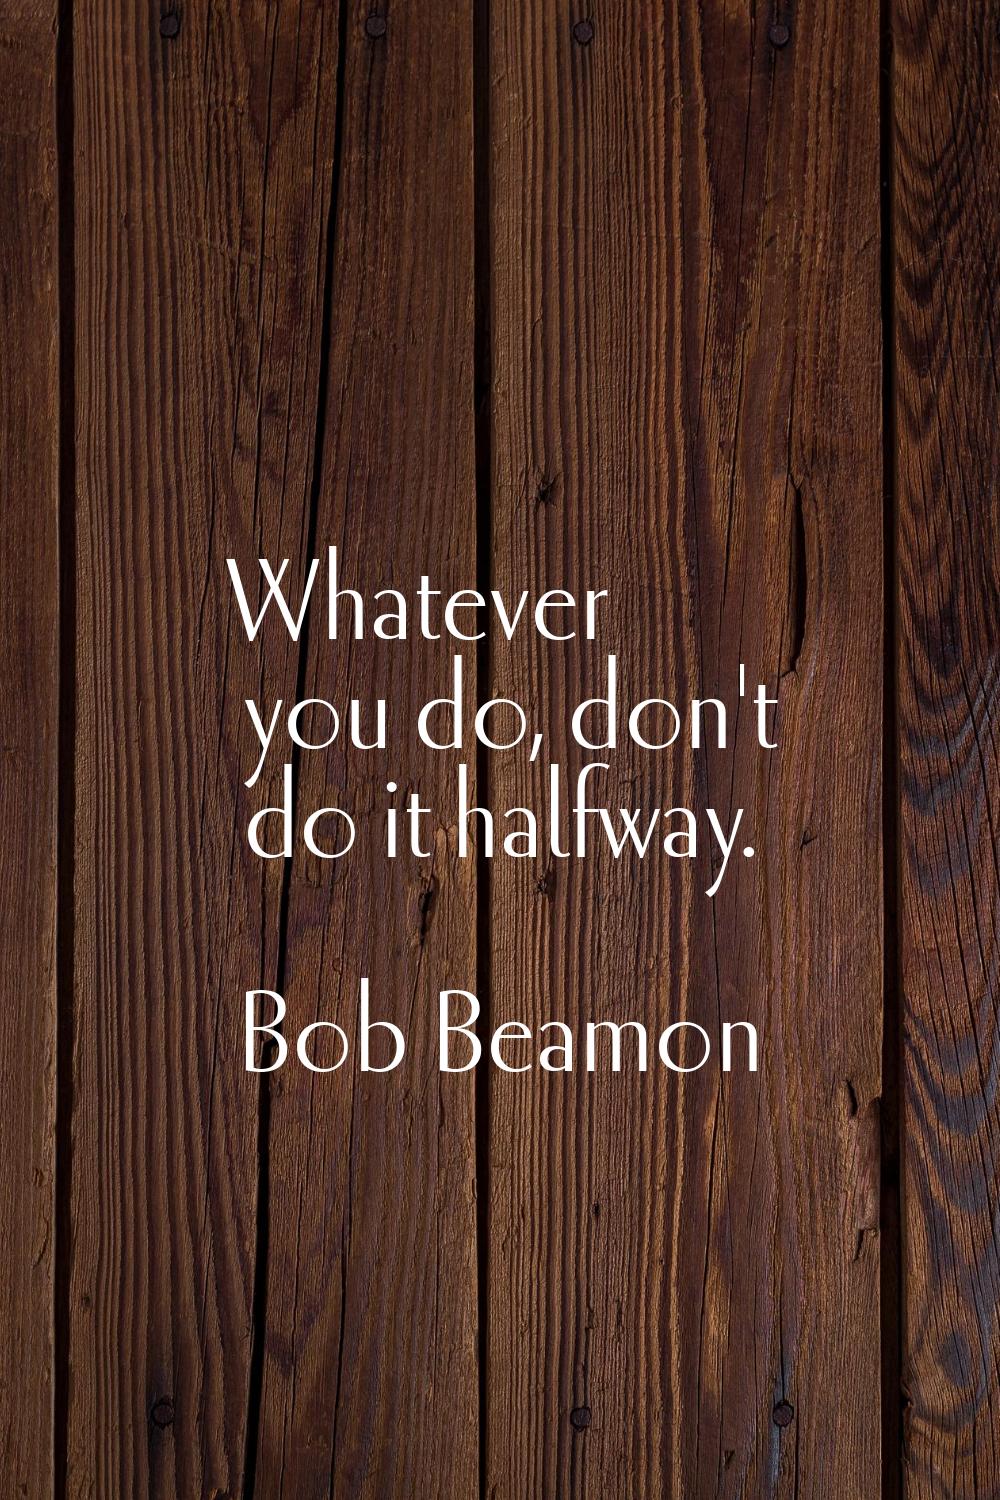 Whatever you do, don't do it halfway.